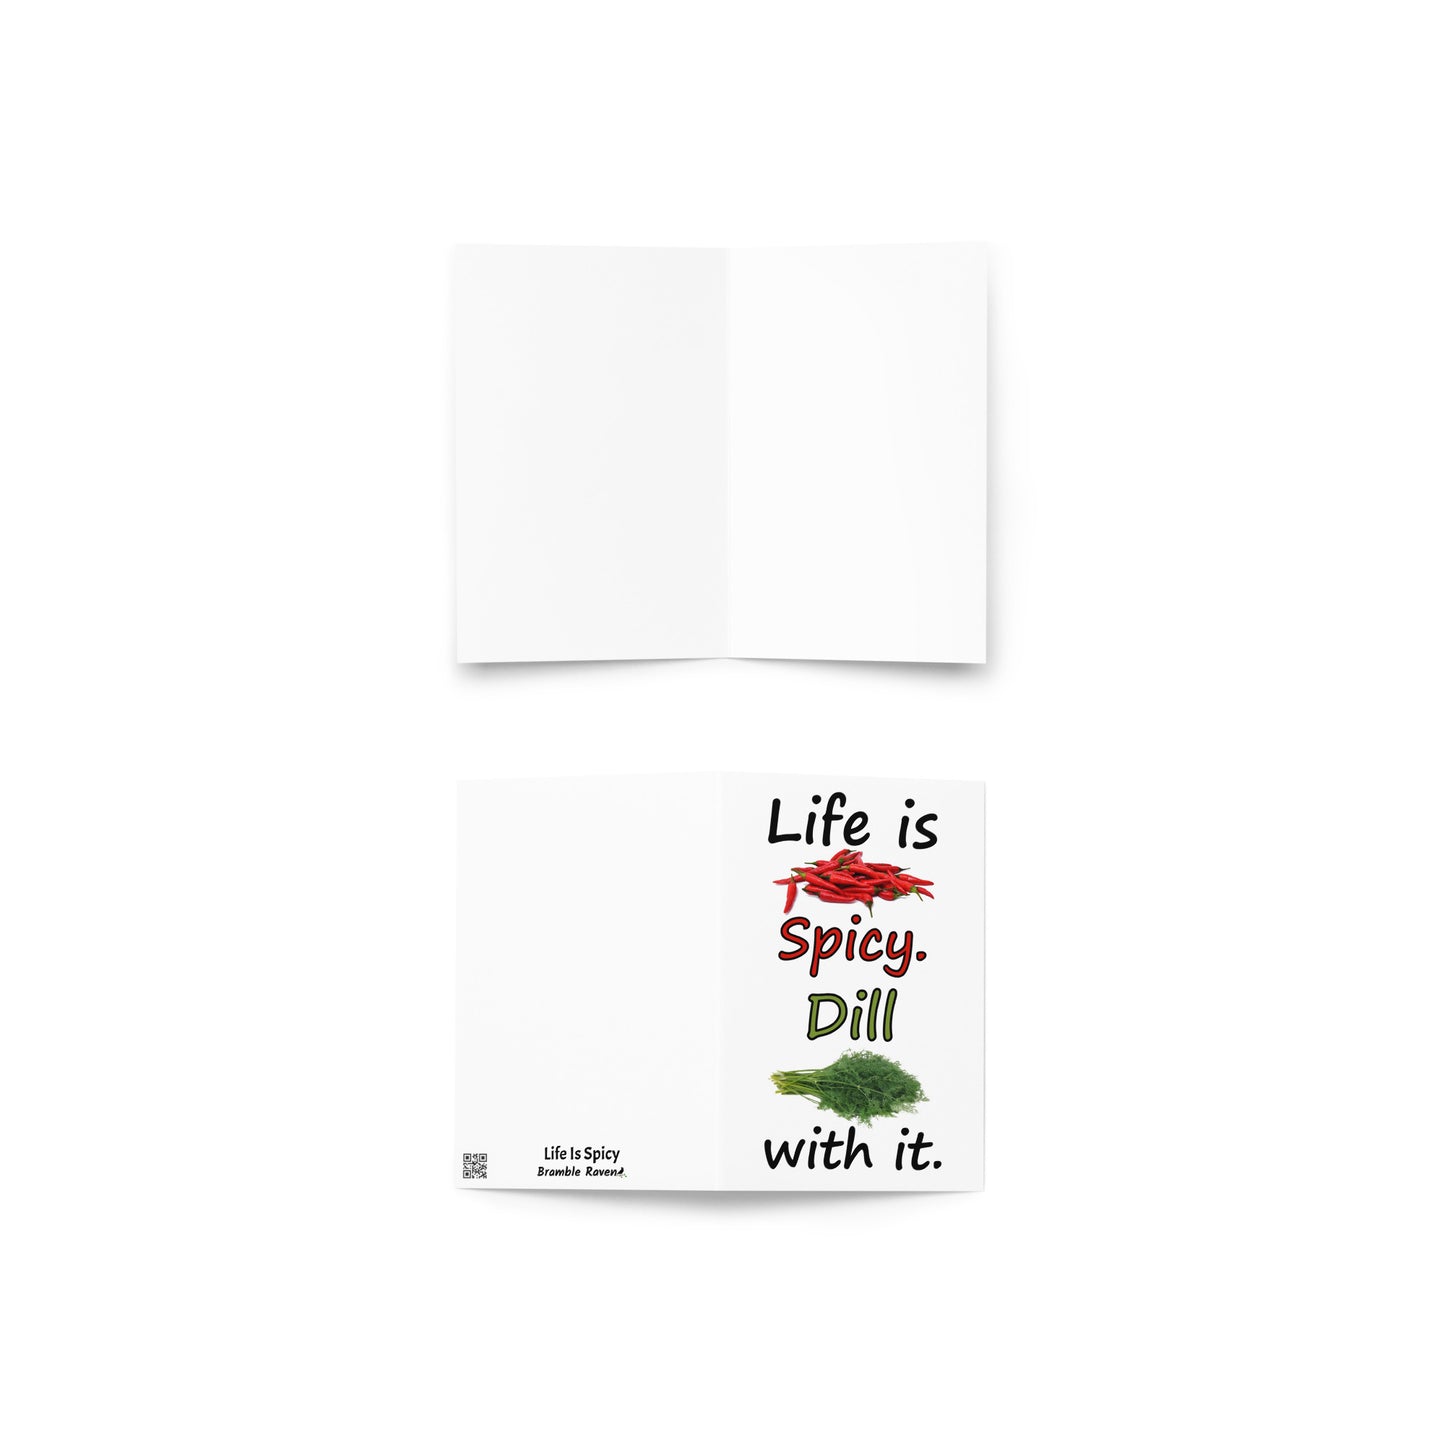 4 by 6 inch Life Is Spicy greeting card. Features Life is Spicy, Dill With It text, with image of chili peppers and dill weed on the front. The inside is blank. Comes with a white envelope. Card is made of durable paperboard with vibrant printing. Image shows front and back cover, and blank inside.